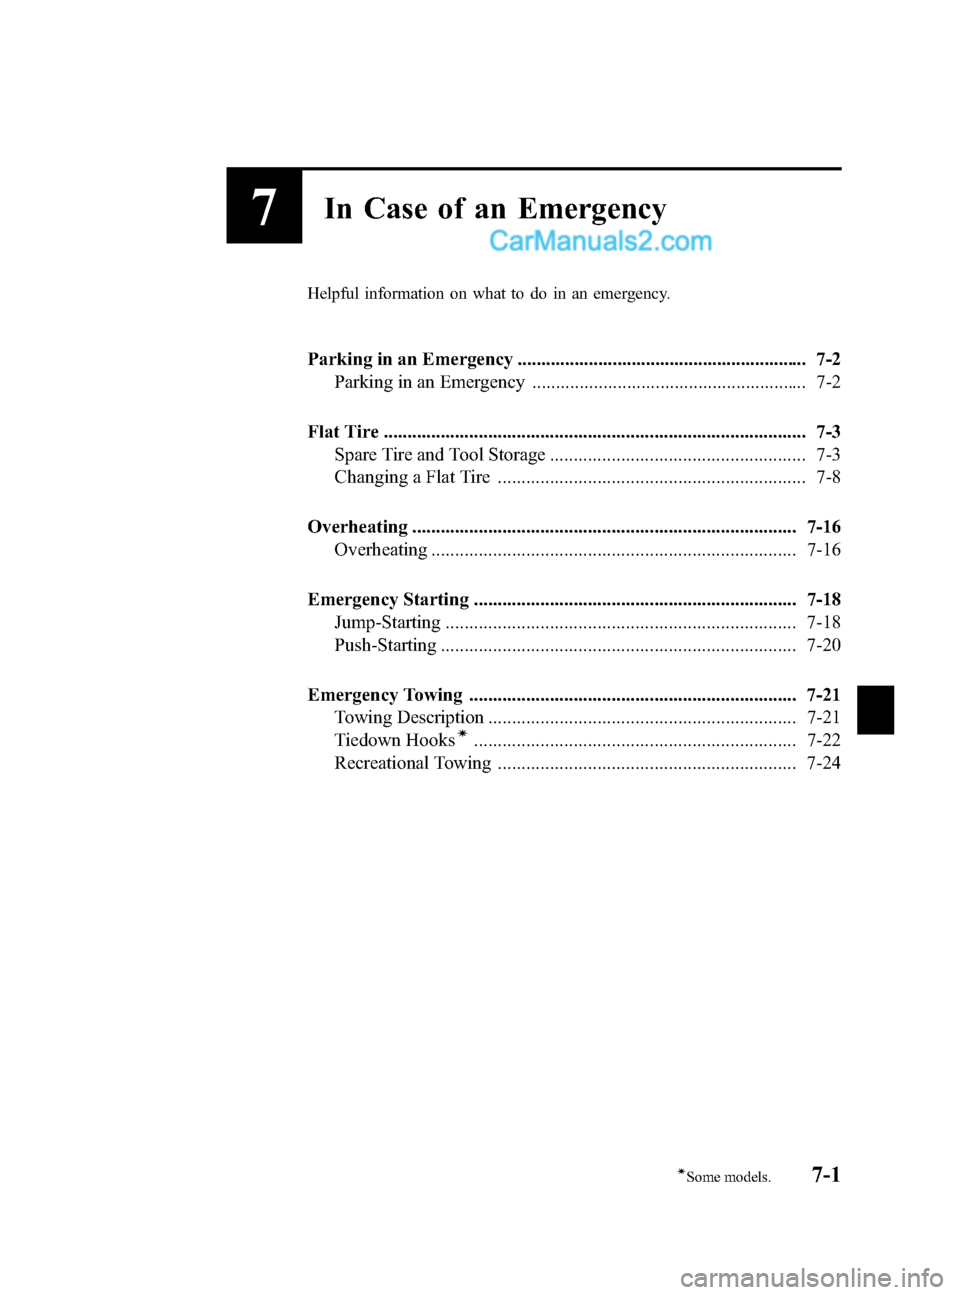 MAZDA MODEL CX-9 2015   (in English) User Guide Black plate (453,1)
7In Case of an Emergency
Helpful information on what to do in an emergency.
Parking in an Emergency ............................................................. 7-2Parking in an E